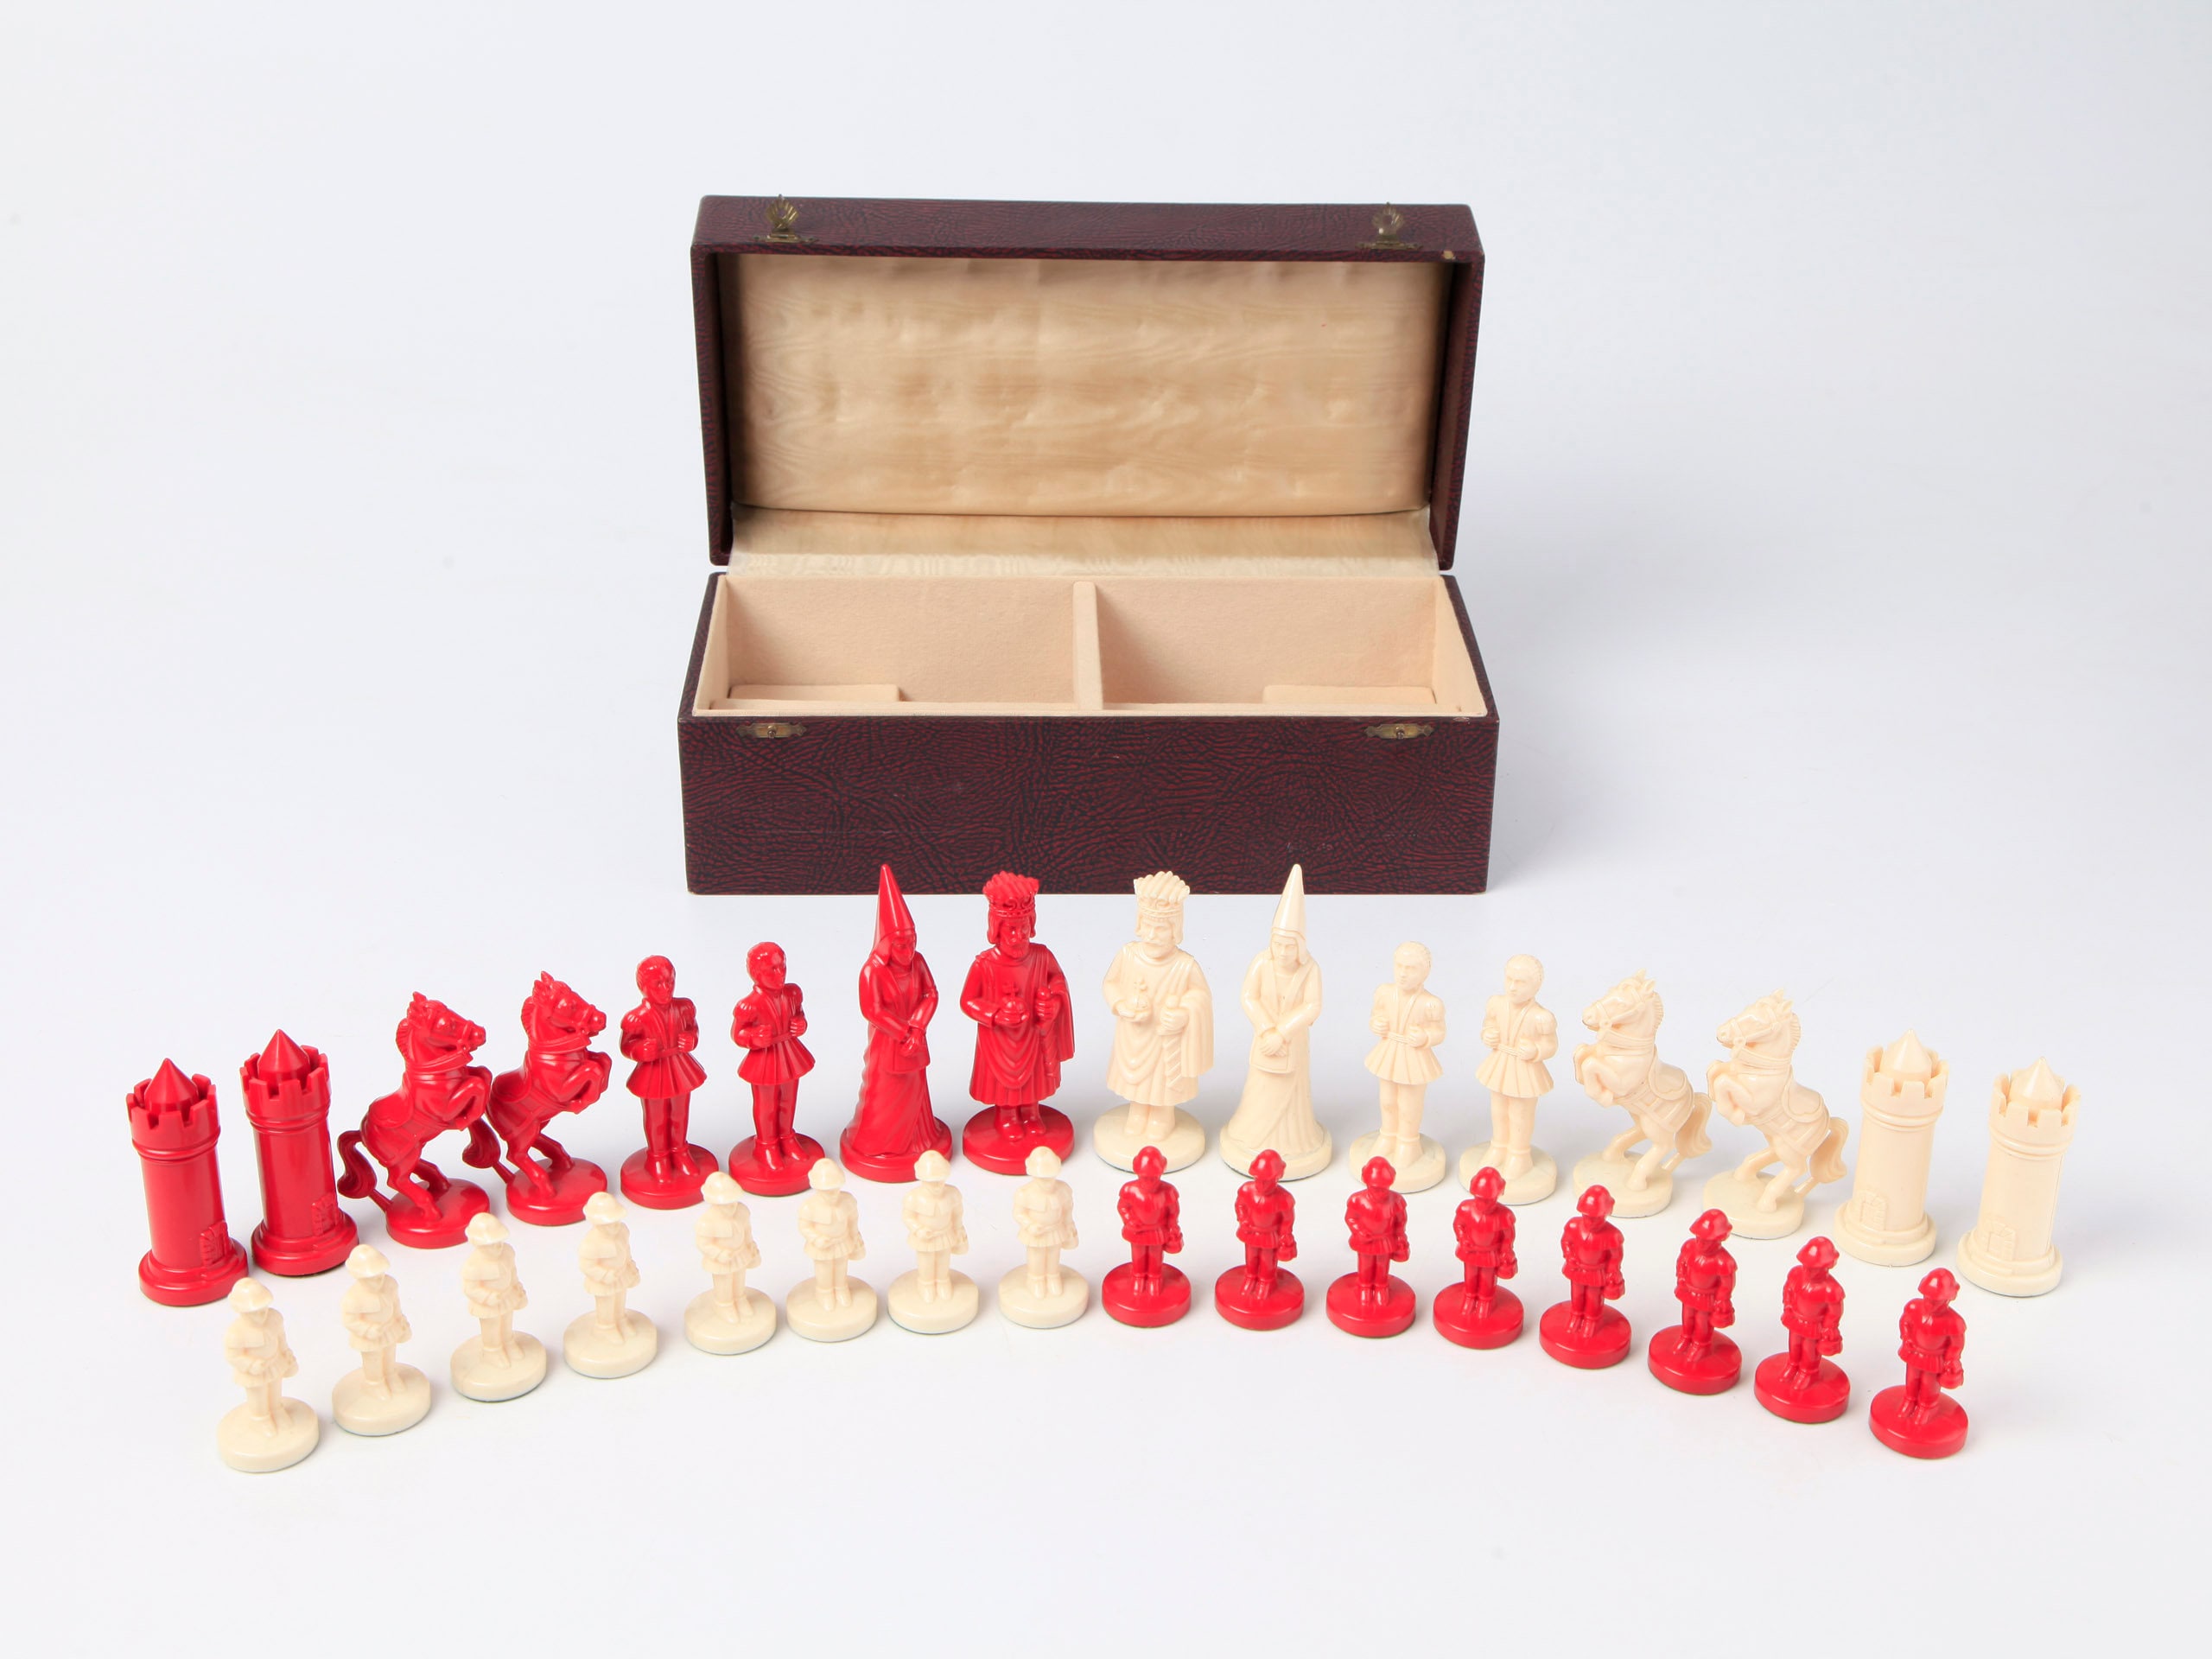 Vintage Weighted Staunton Chess Set KH 95 cm/375 in. -  Portugal